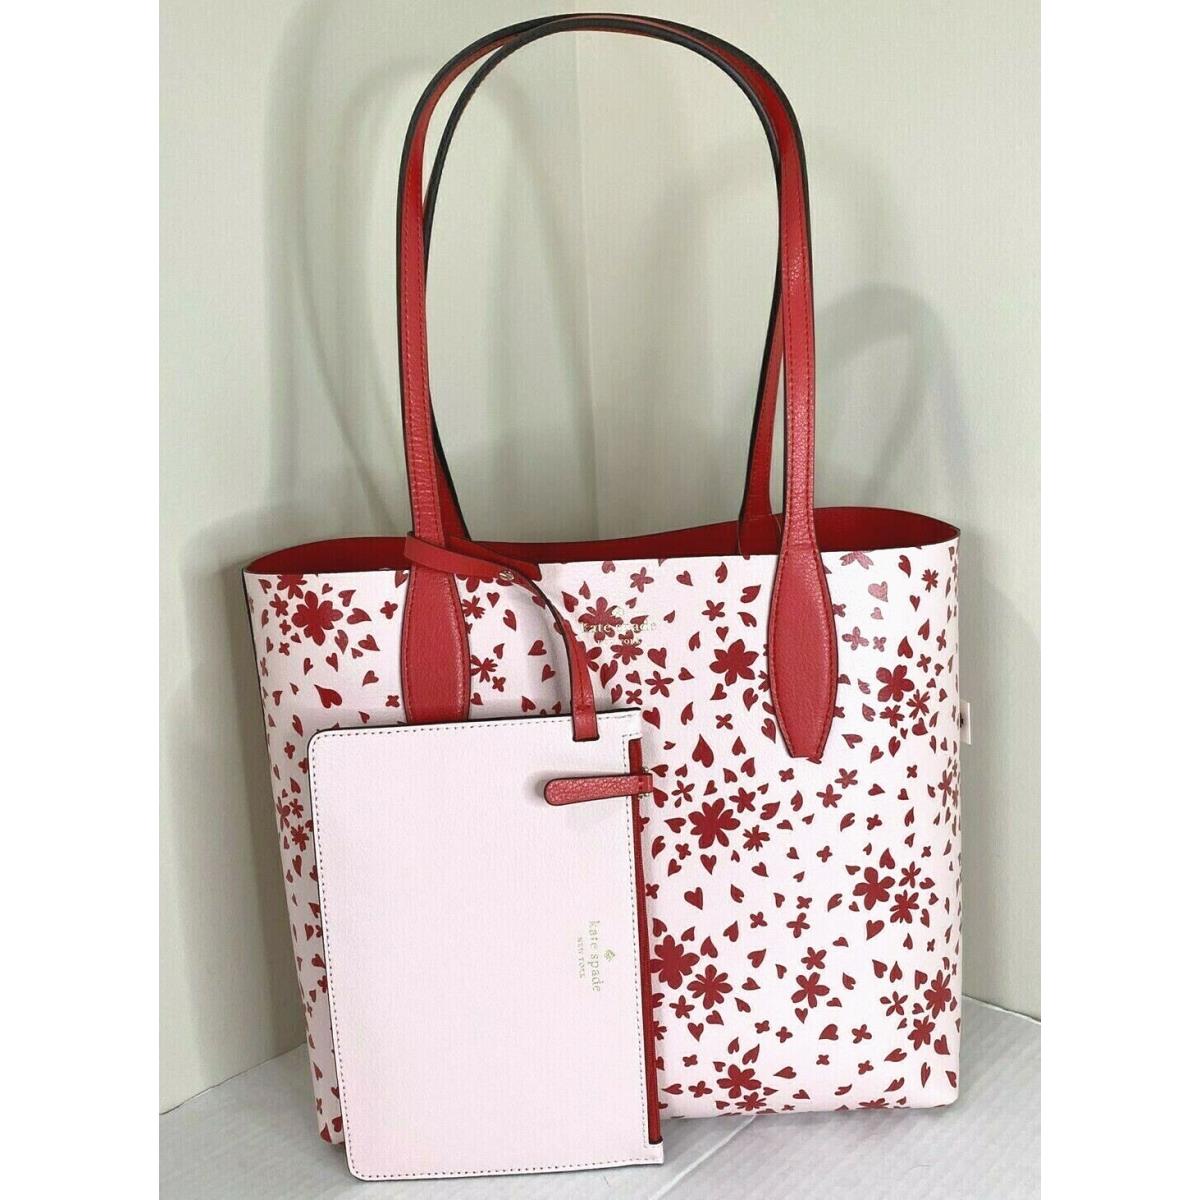 New Kate Spade Small Reversible Tote with Pouch Love Shack Red Multi / Dust Bag